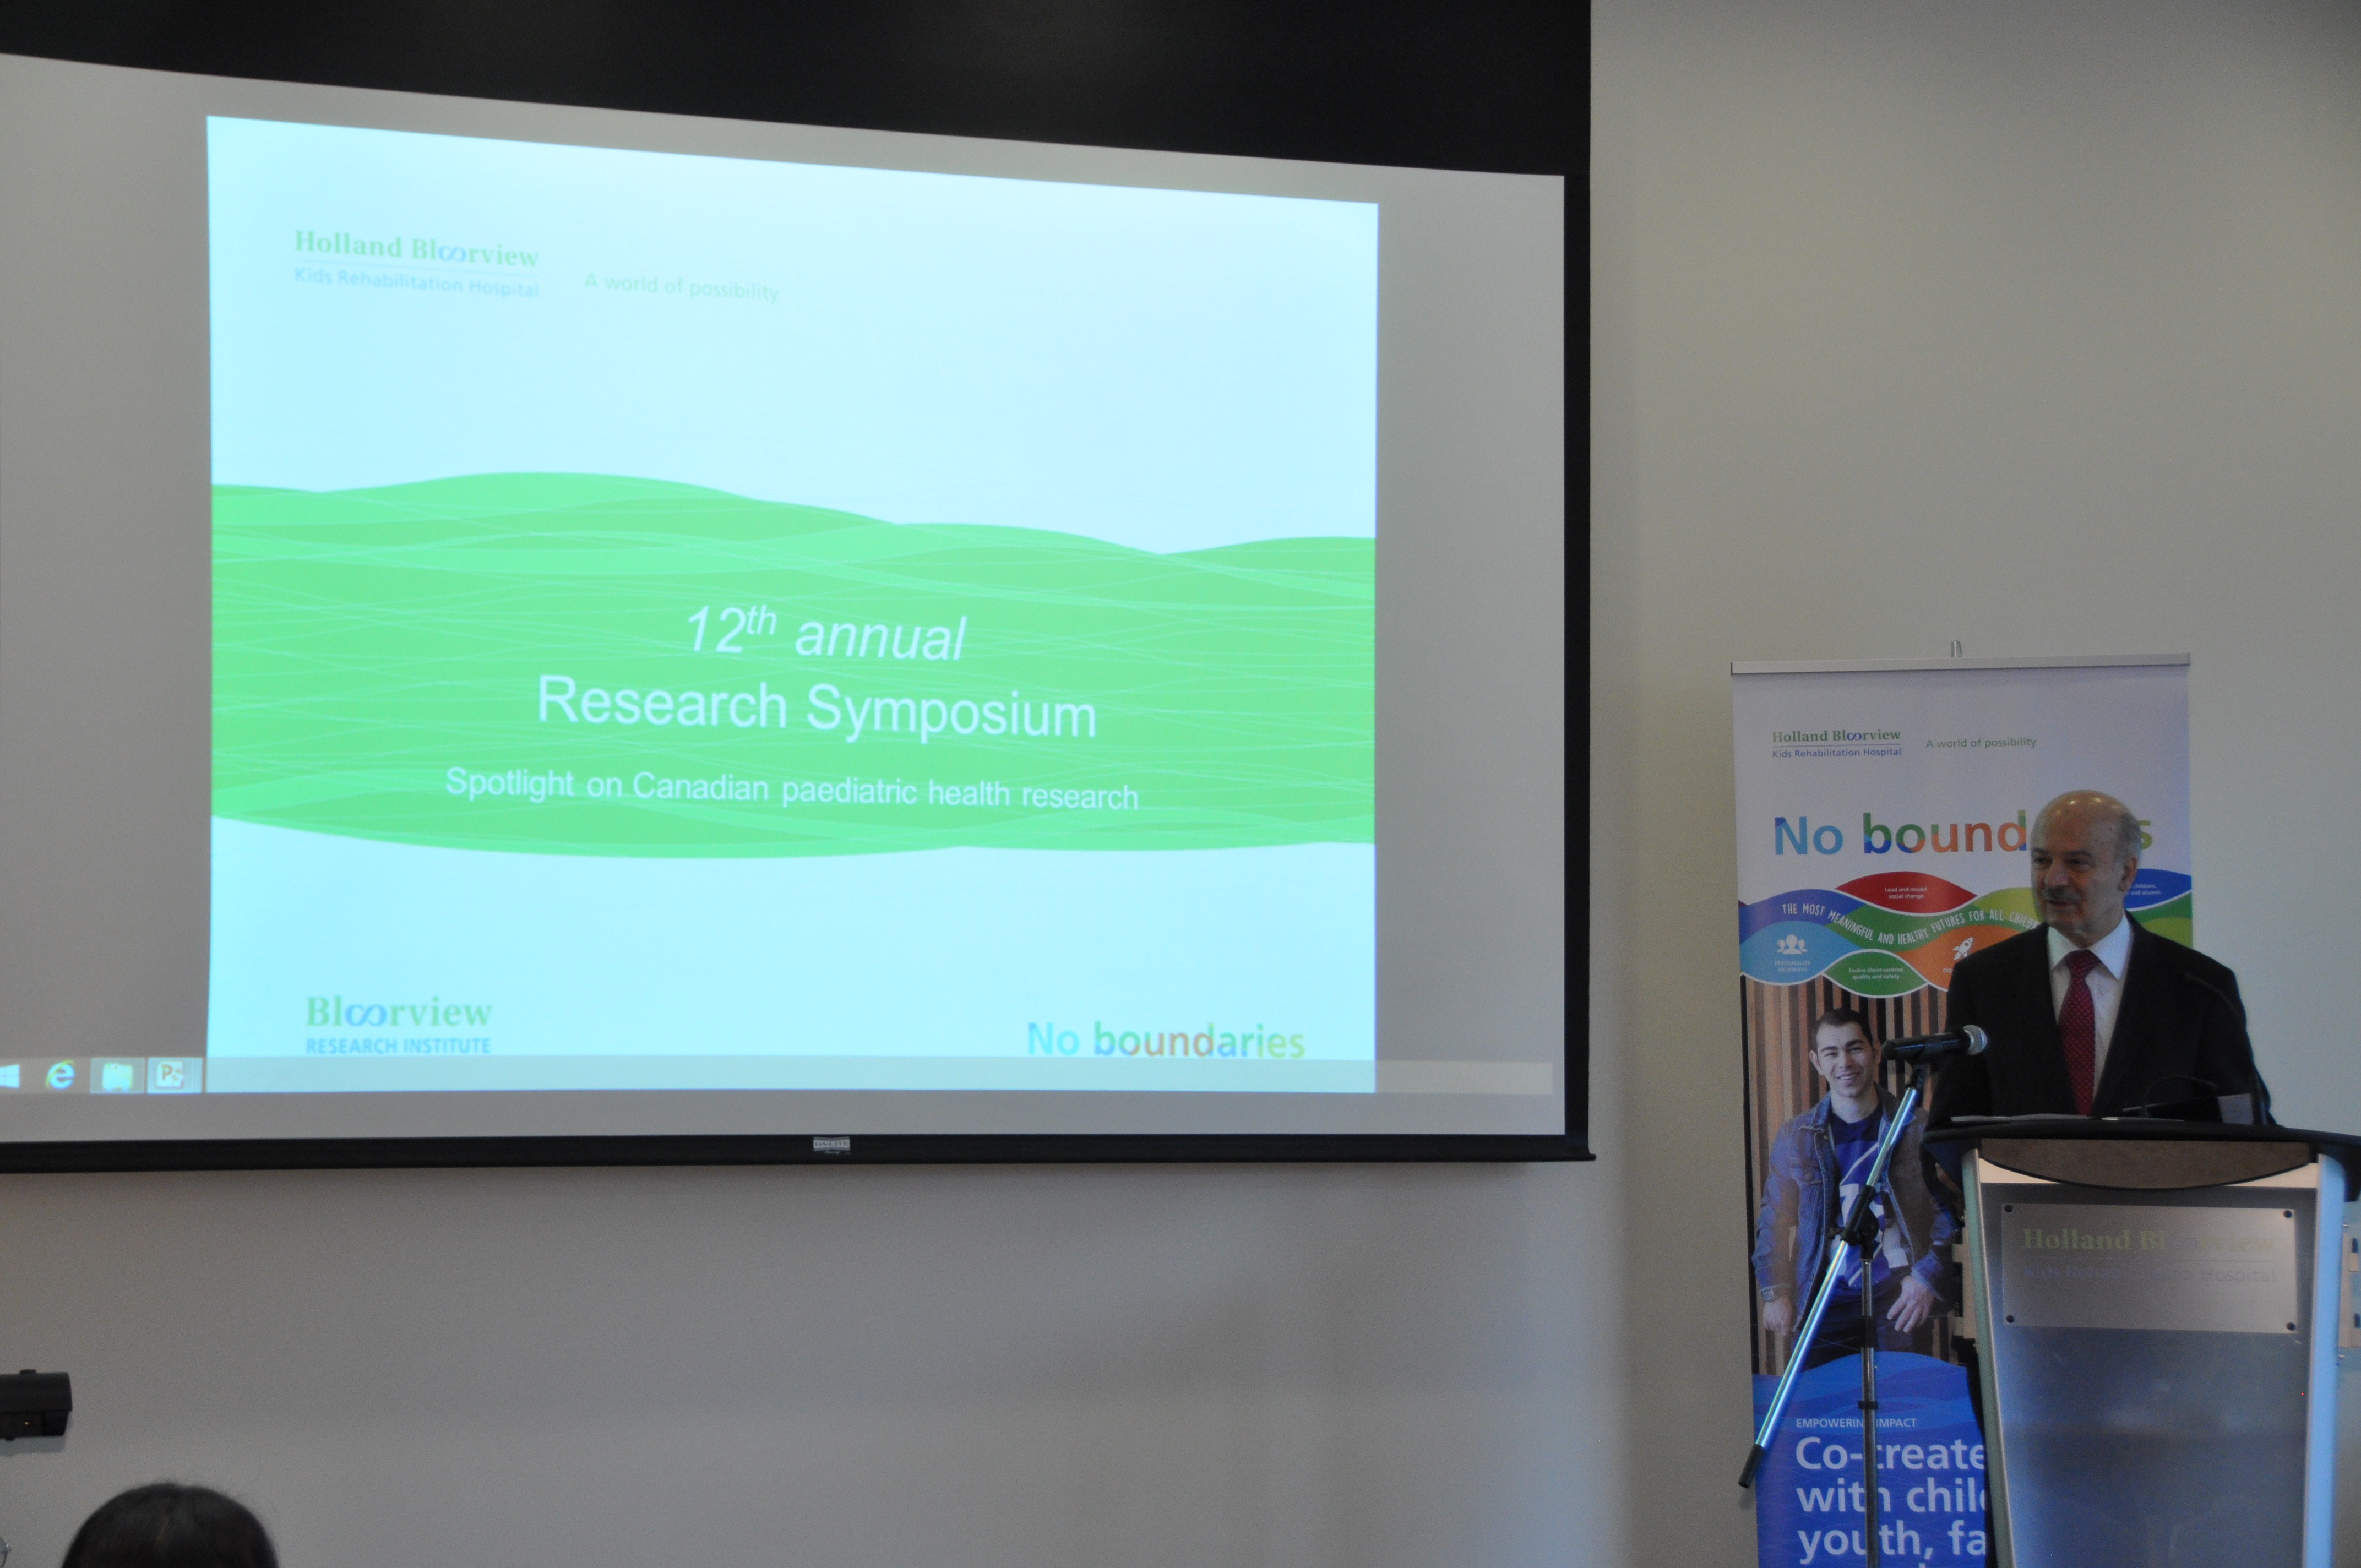 Honourable Reza Moridi, Minister of Research, Innovation, and Science provides opening remarks